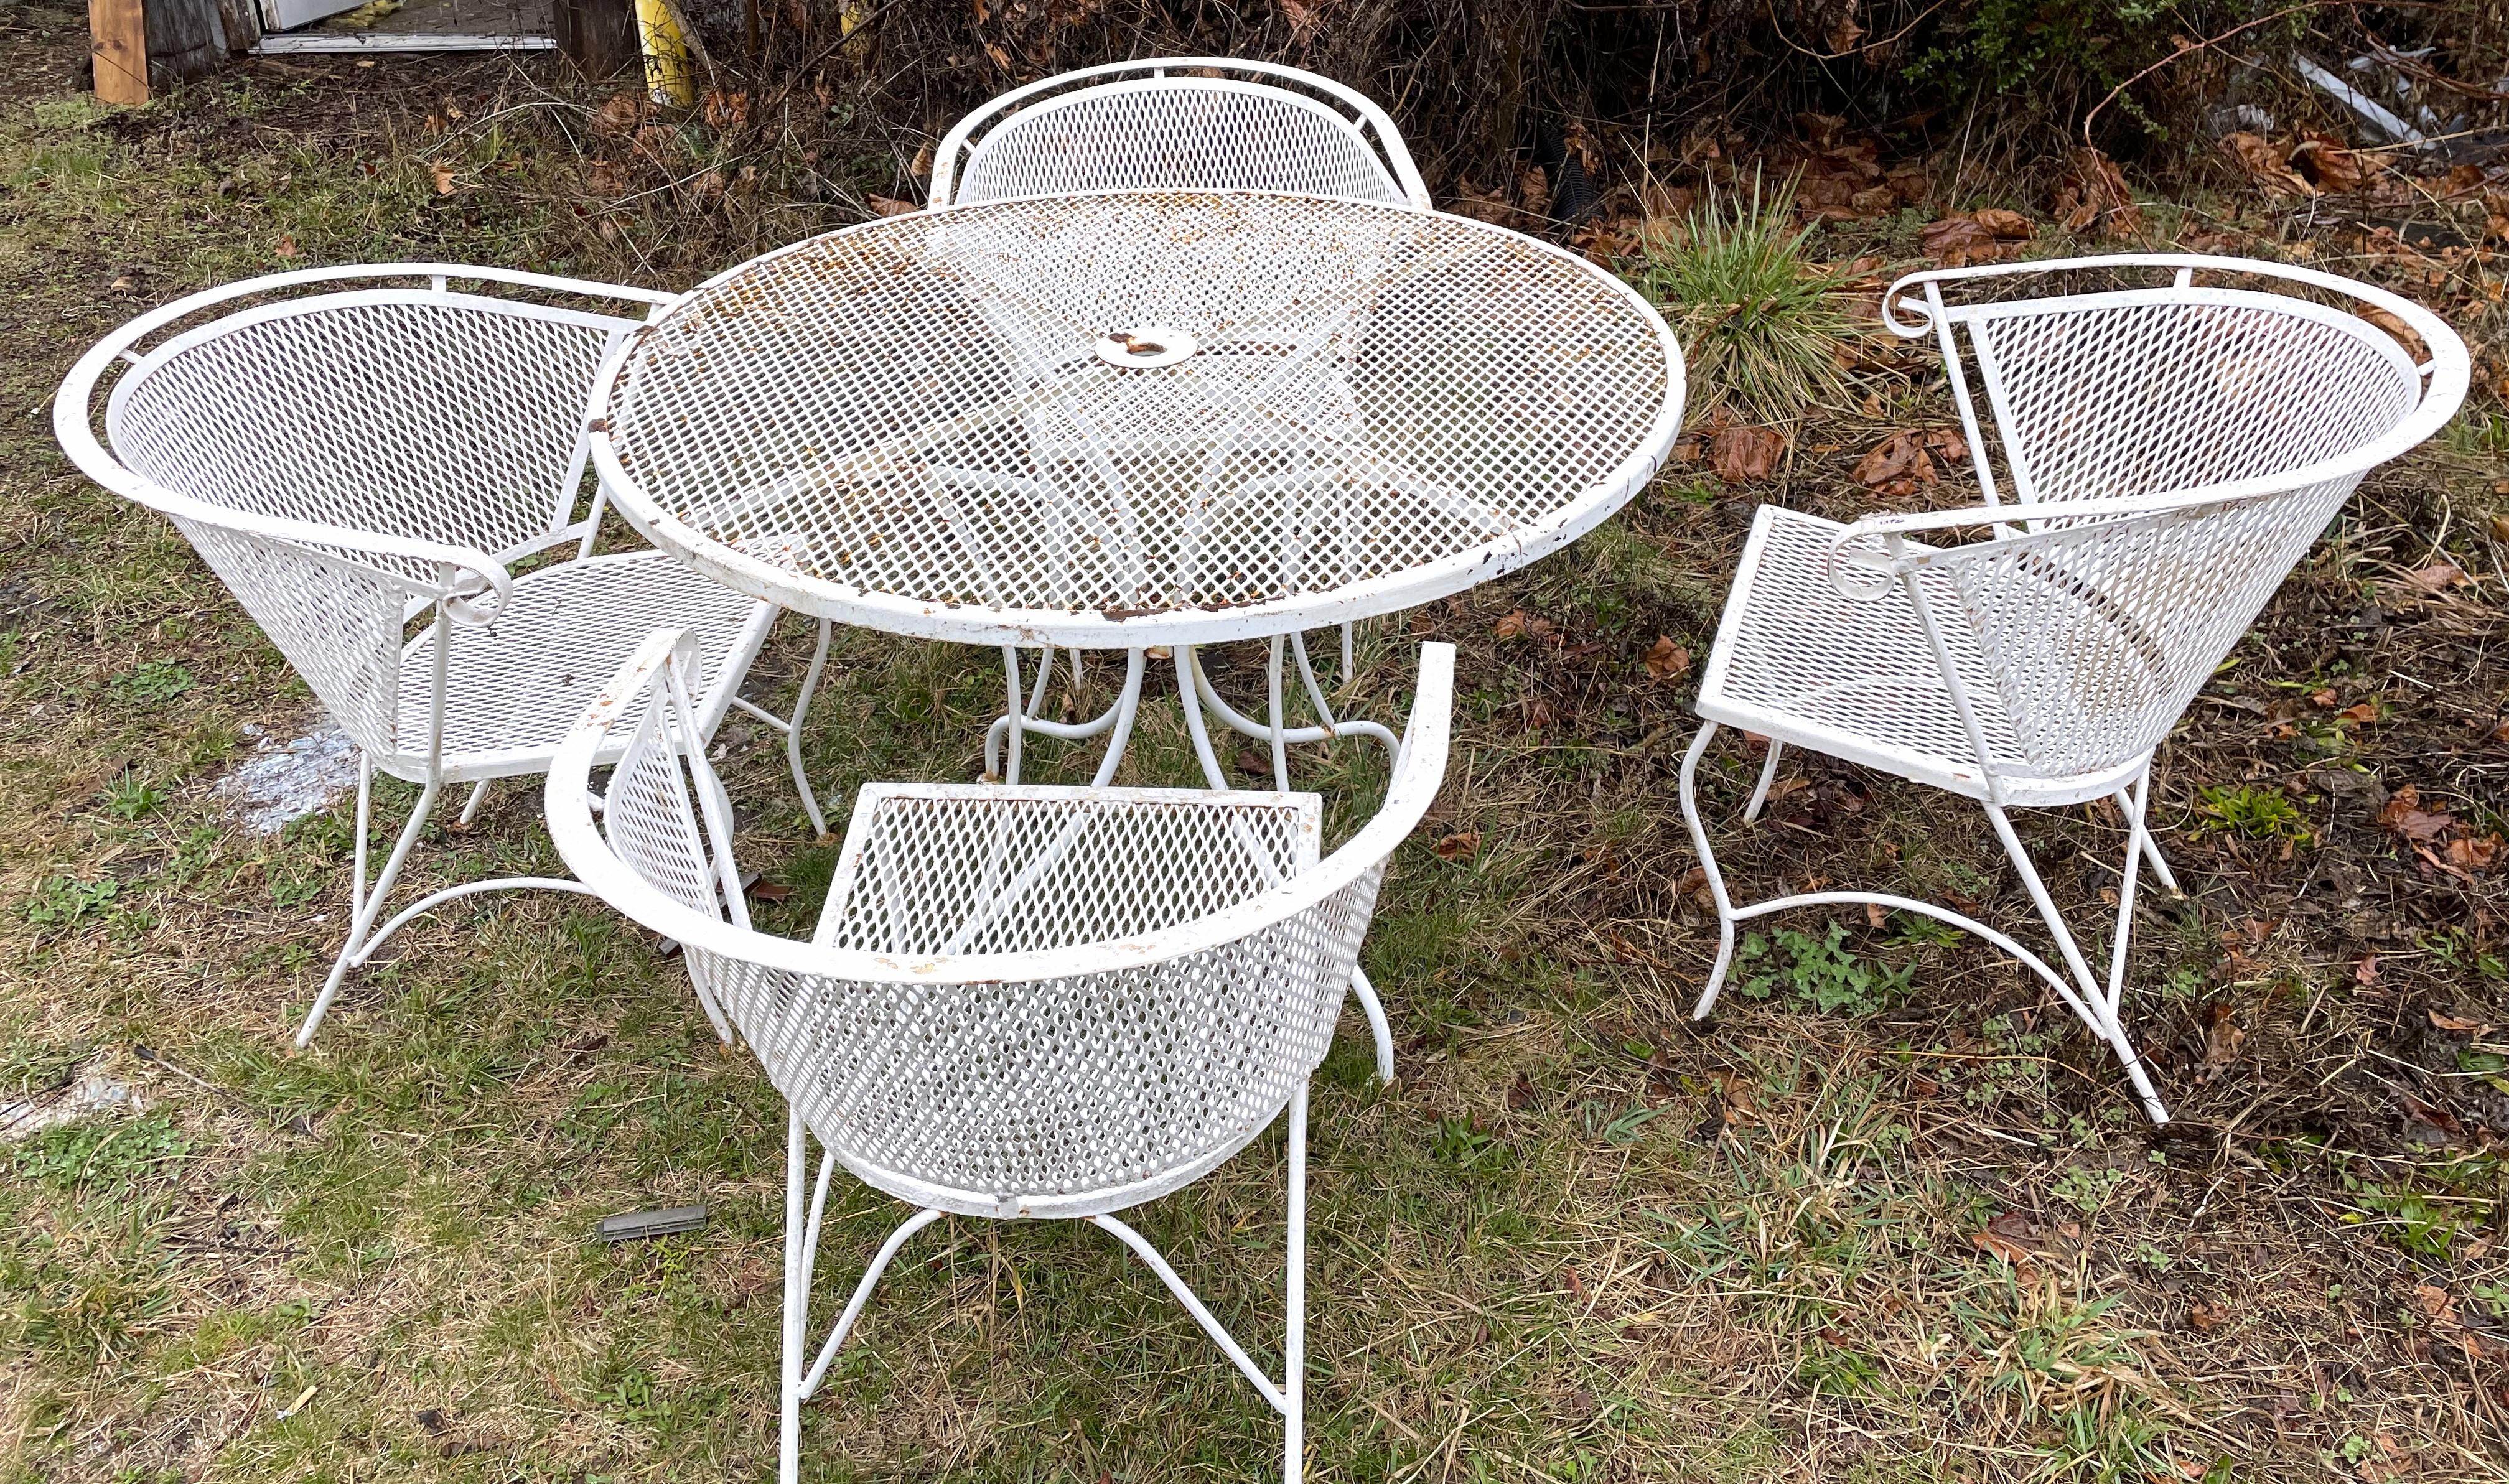 Here is a great looking and comfortable set that is just what you need for your outdoor celebrations this summer. The entire set is structurally very sturdy but the paint has worn and there is some rust especially on the table, redone in the color